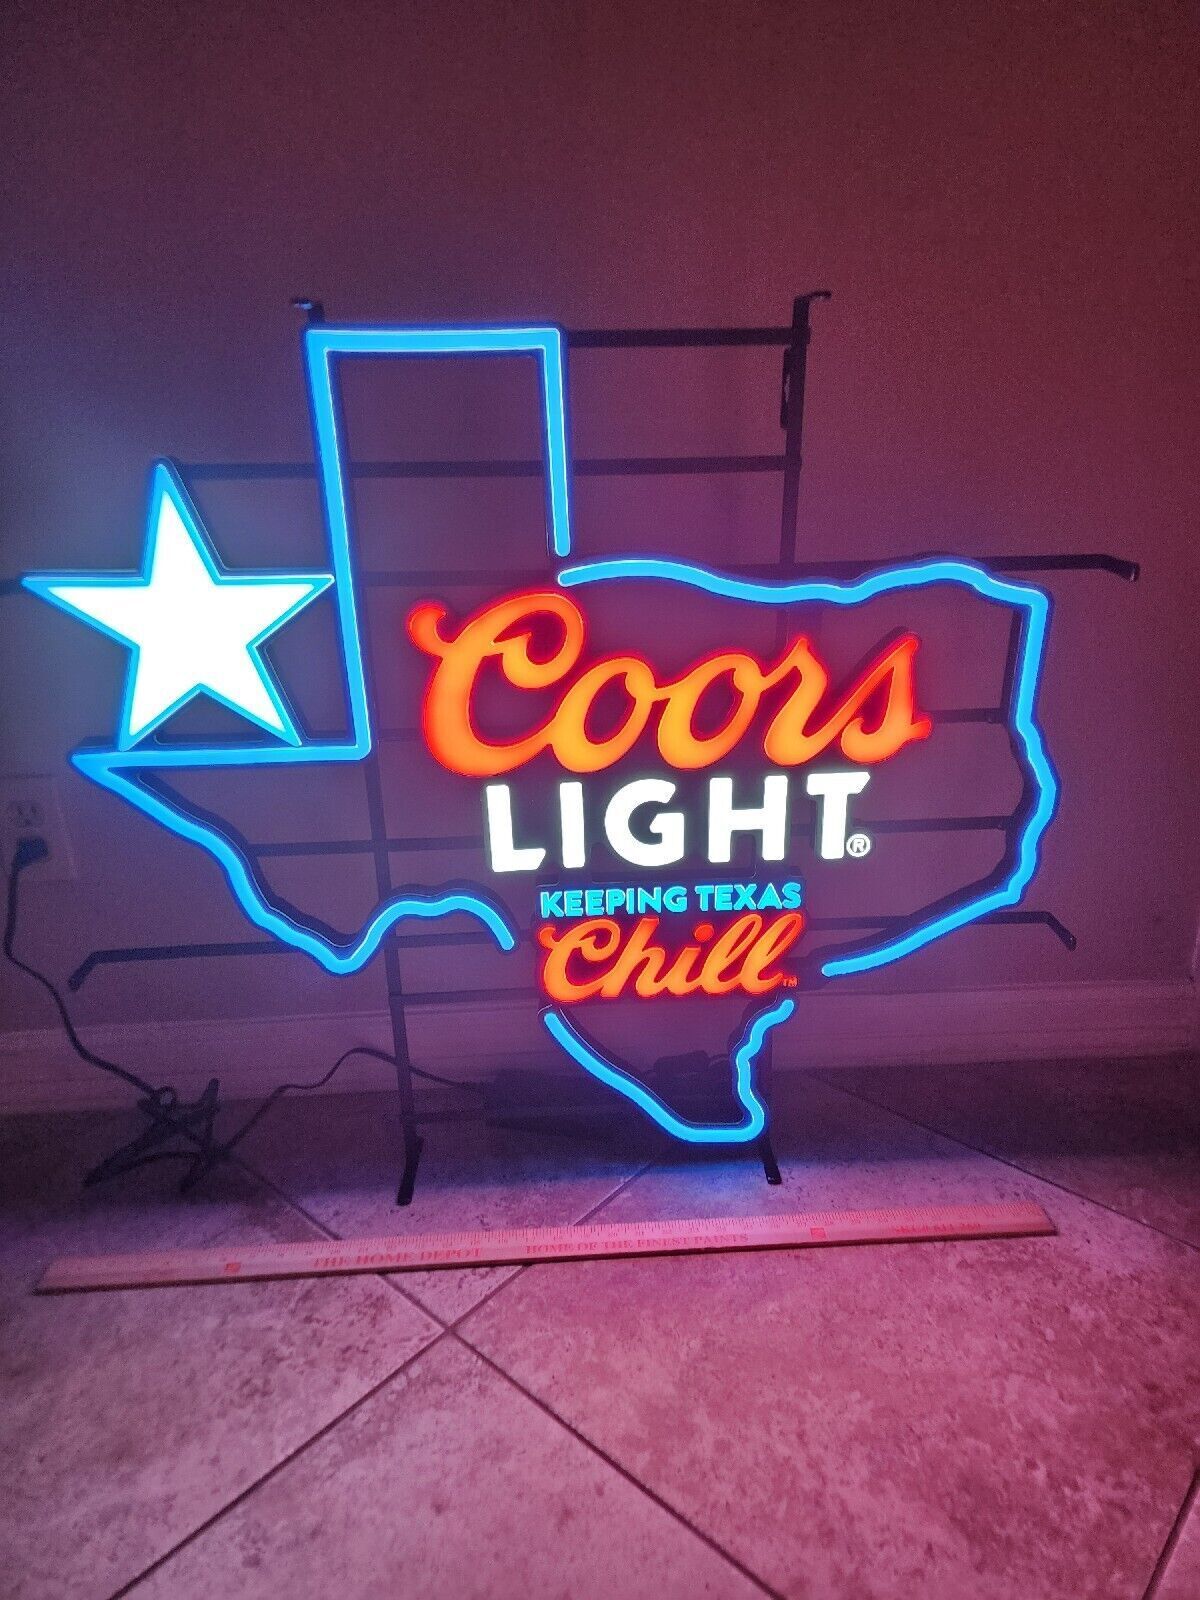 Beer Mountain Keeping Texas Chill Vivid LED Neon Sign Light Lamp With Dimmer